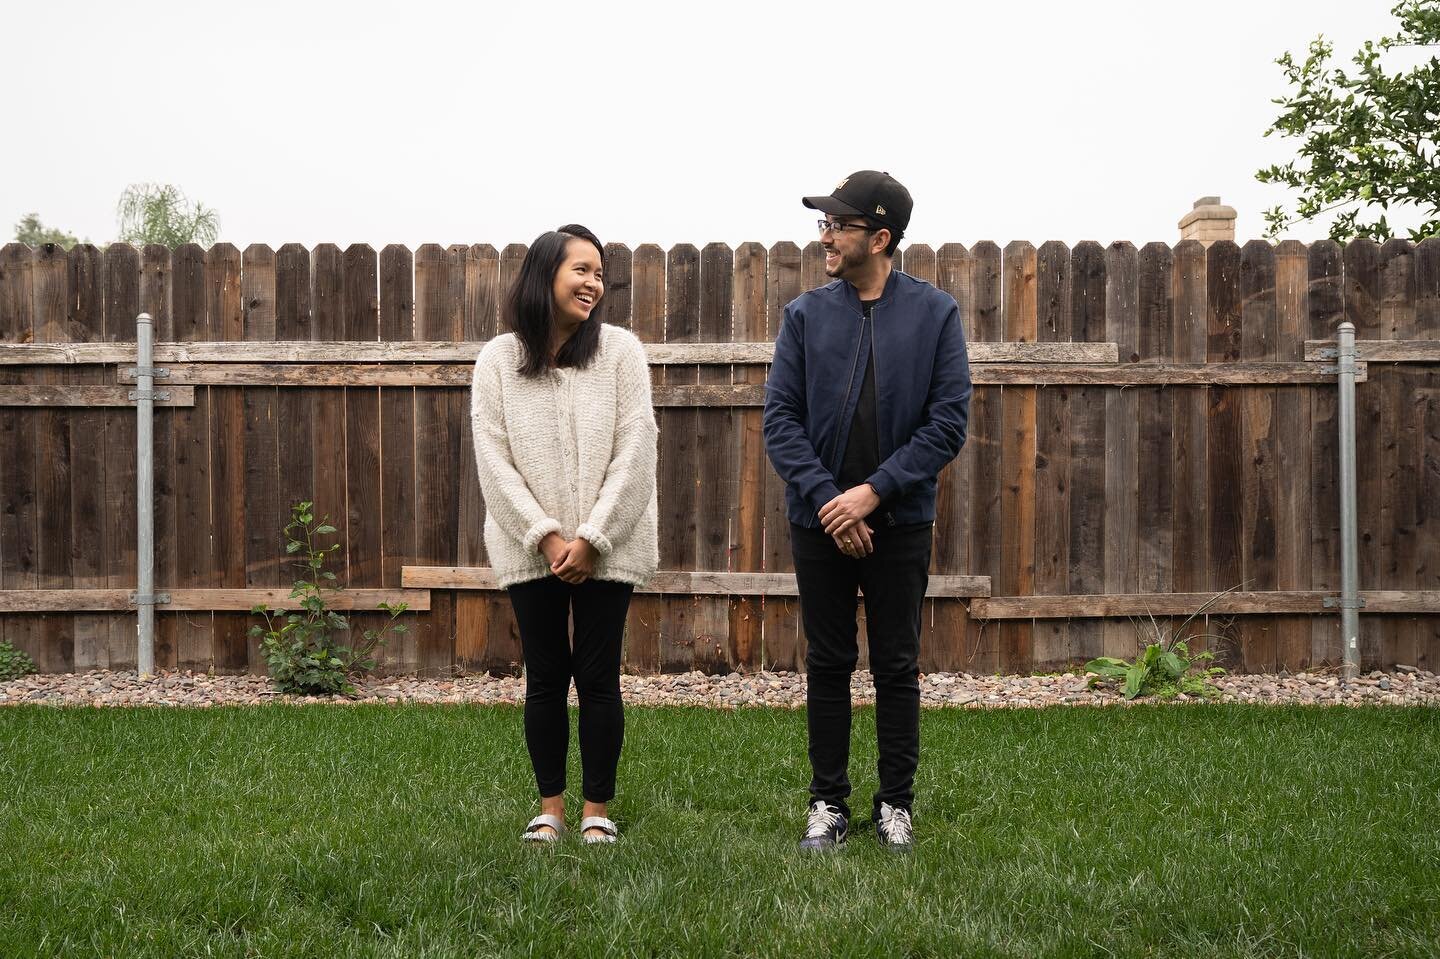 F I R S T  H O M E ⏤  Alix &amp; Valida |  Rancho Cucamonga, CA

After searching in several cities, these two decided to settle a little more north with gorgeous views of the mountains. They enjoy dining outdoors, so the beautiful yard space is perfe